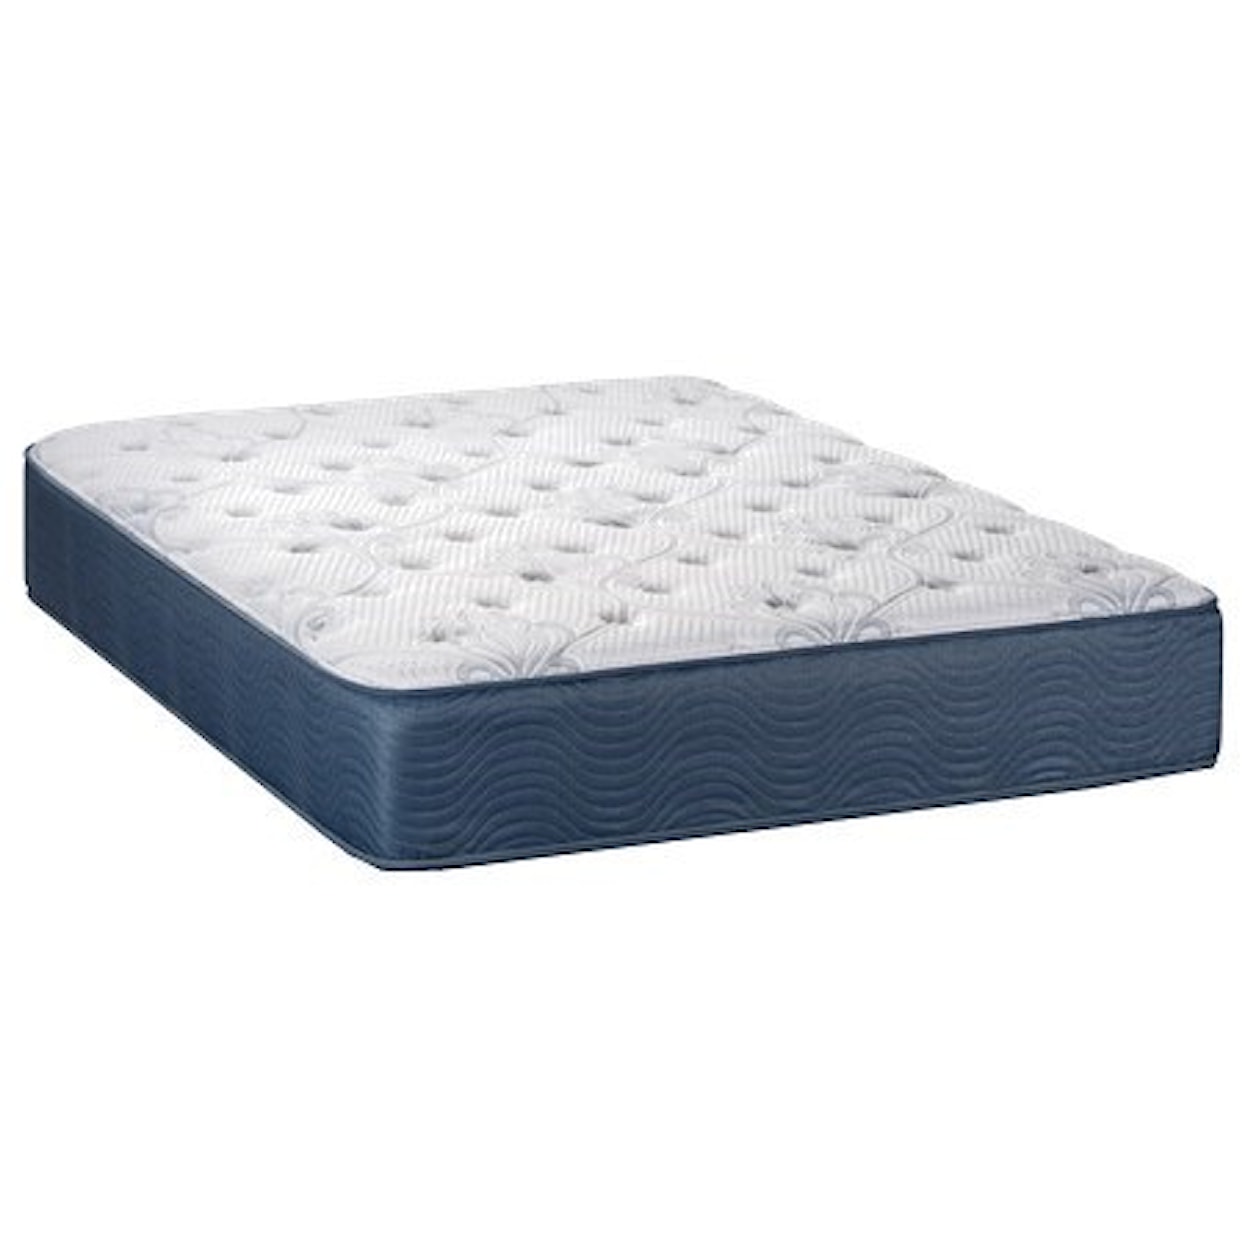 Restonic Decatur II Cal King Pocketed Coil Mattress